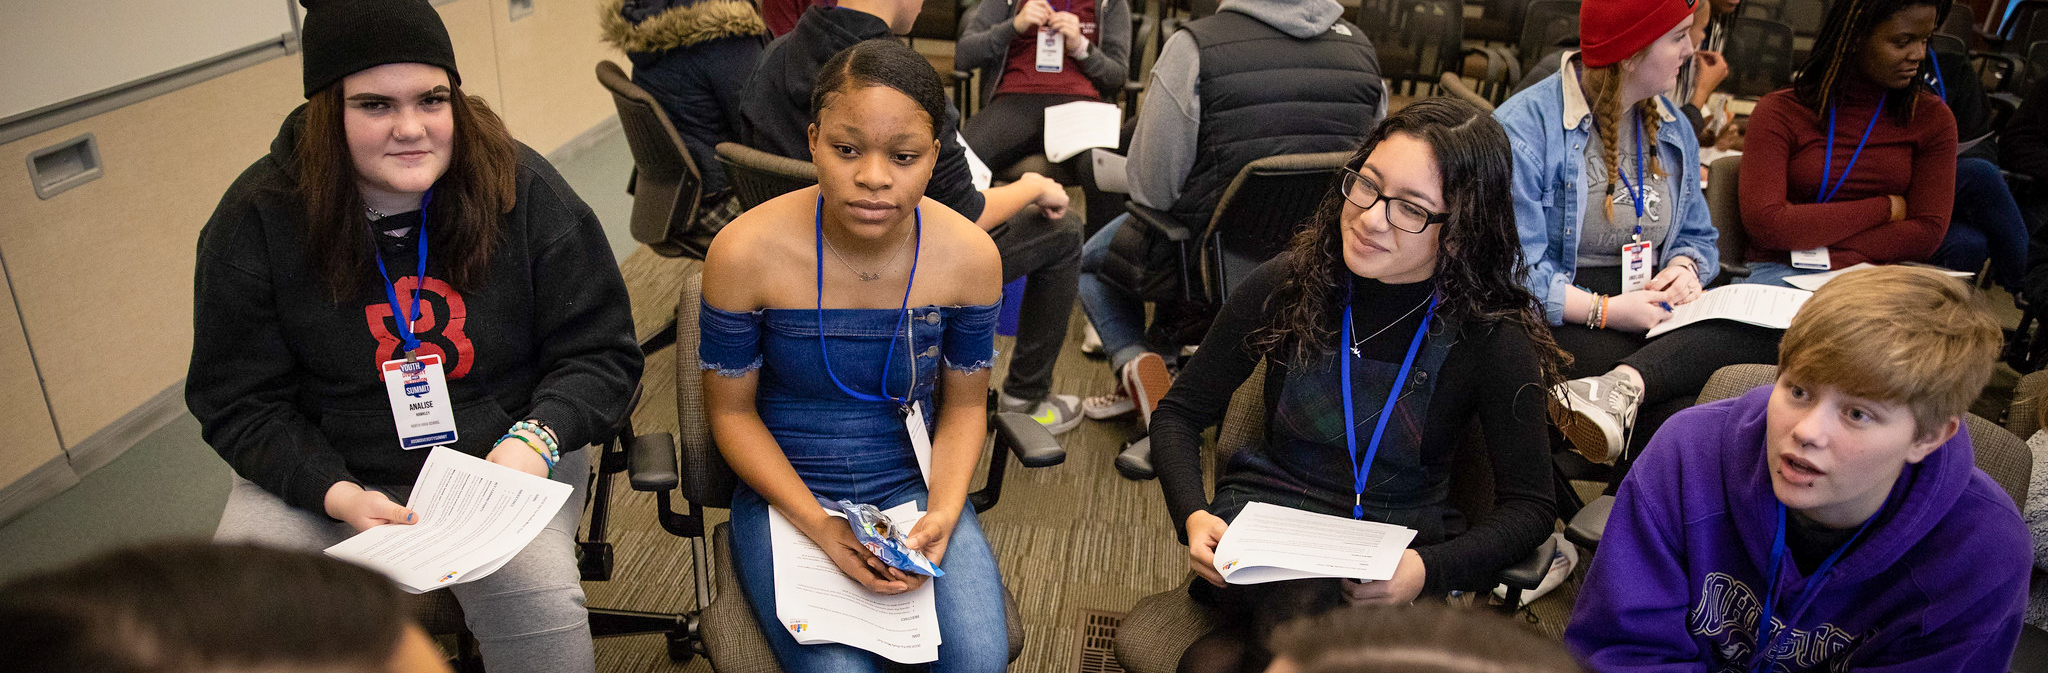 Youth Diversity & Inclusion Summit: A Good Idea Getting Better